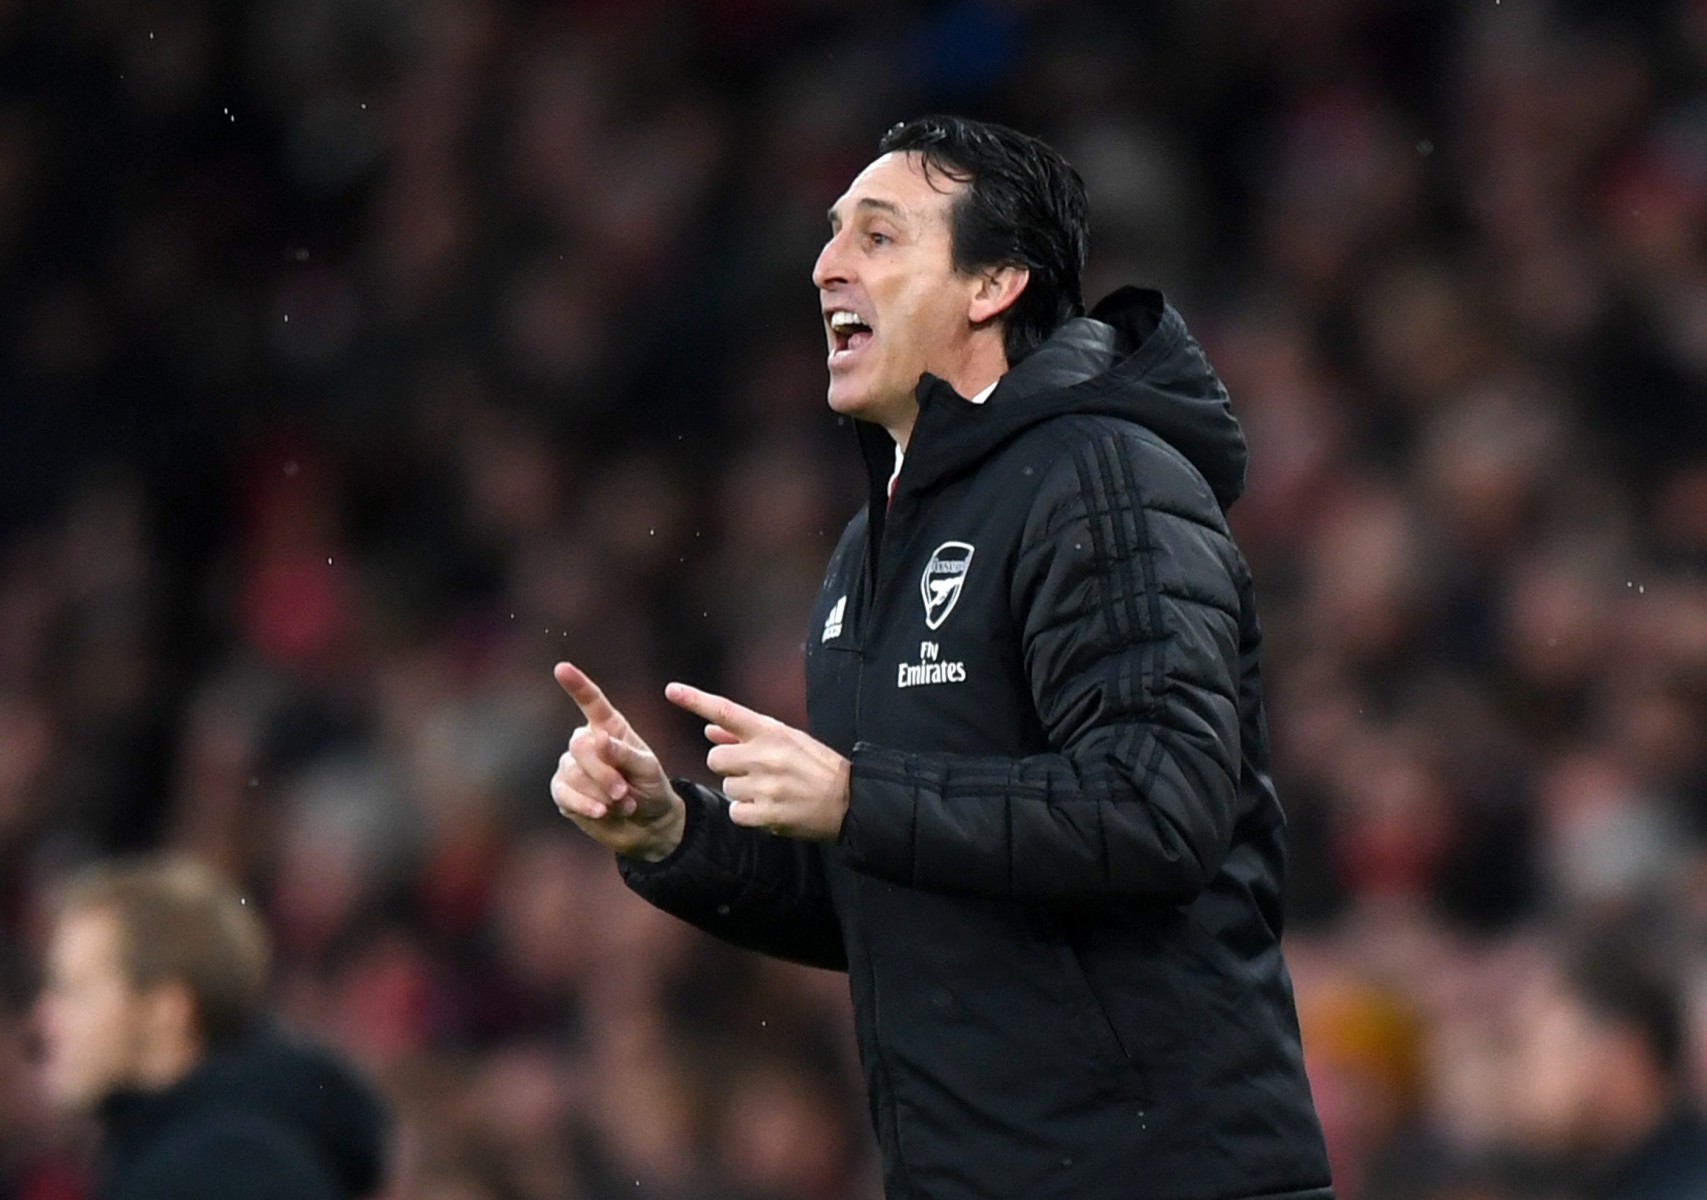 Unai Emery's time may soon be up at the Emirates and Arsenal could go after the ex-Spurs boss as his replacement